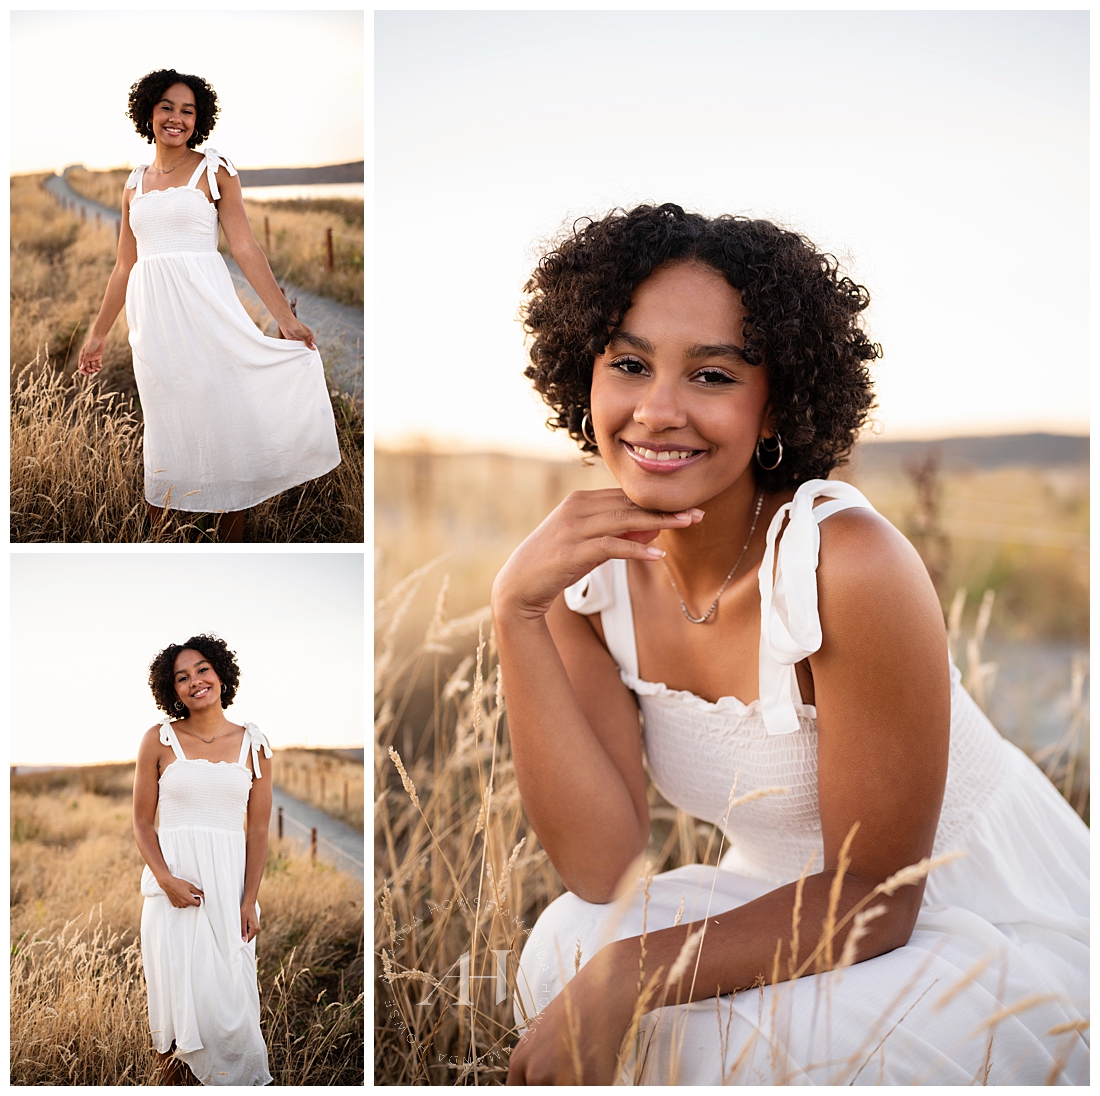 PNW Senior Portrait Session with Natural Sunlight and Tall Fields of Grass | Amanda Howse Photography Class of 2024 Senior 